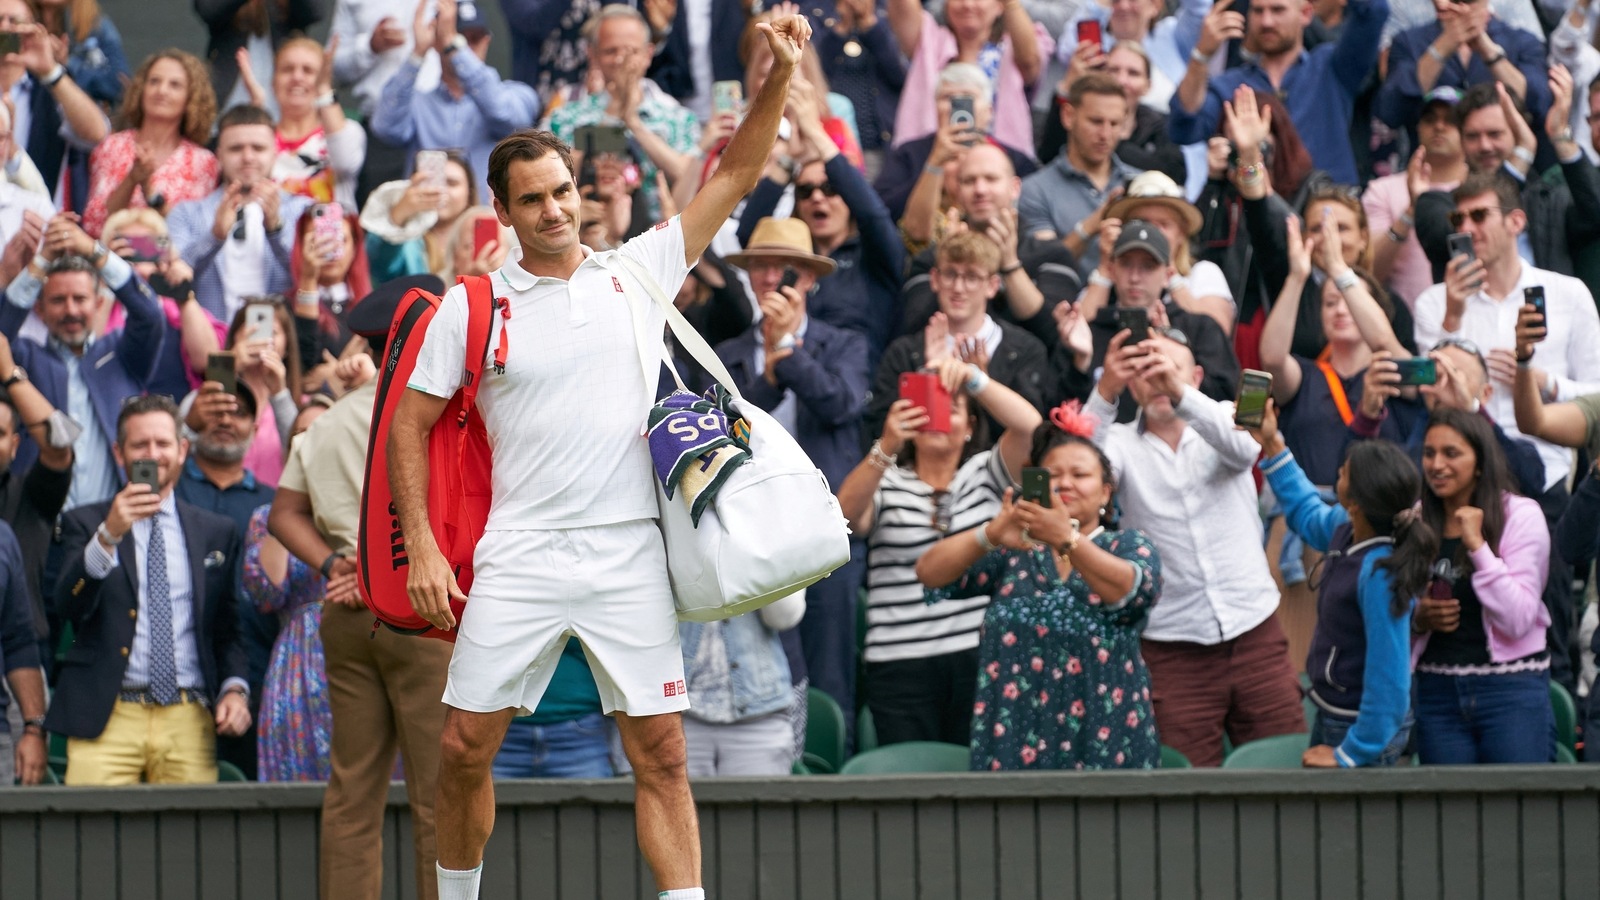 ‘Never thought I would say this but six months ago…’: Roger Federer reveals future plans after retirement announcement